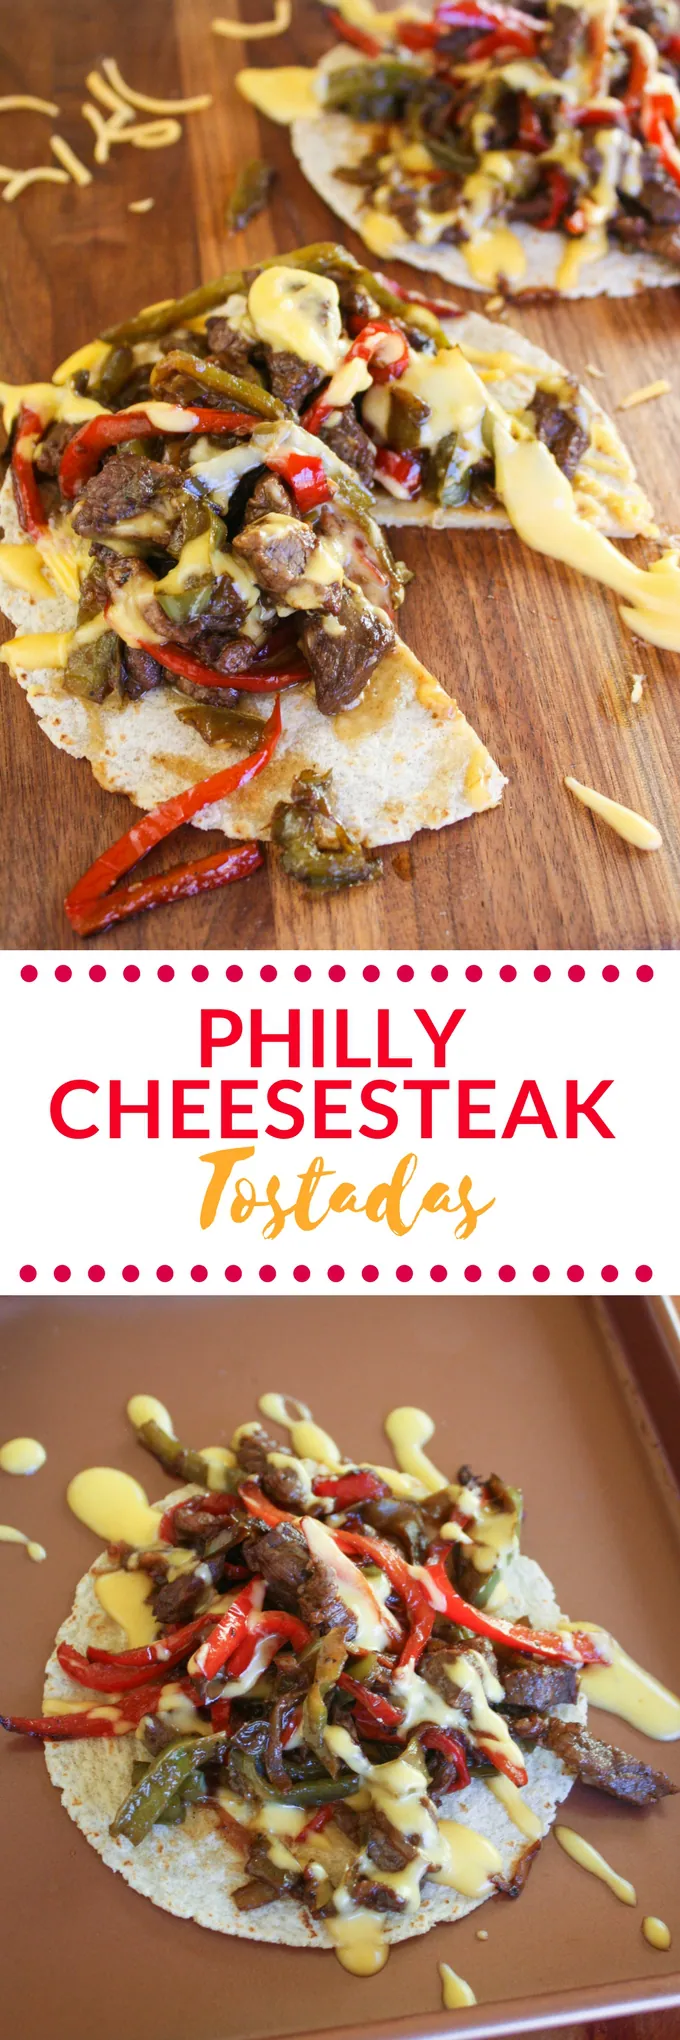 Philly Cheesesteak Tostadas are a fun meal any night of the week. Philly Cheesesteak Tostadas are a great take on the classic sandwich!